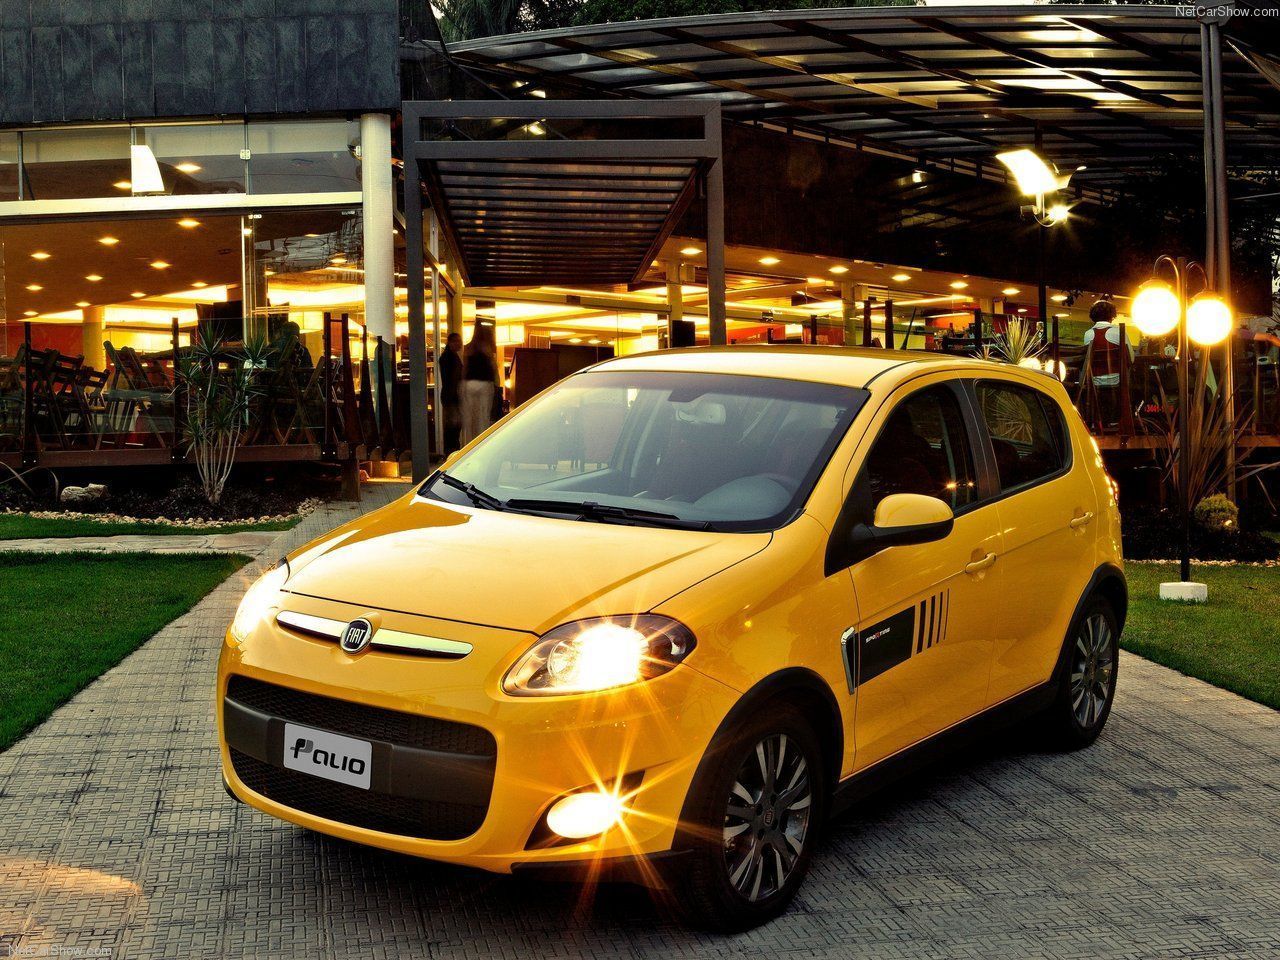 2014 Palio From Brazil could be the B-segment killer for Fiat in India